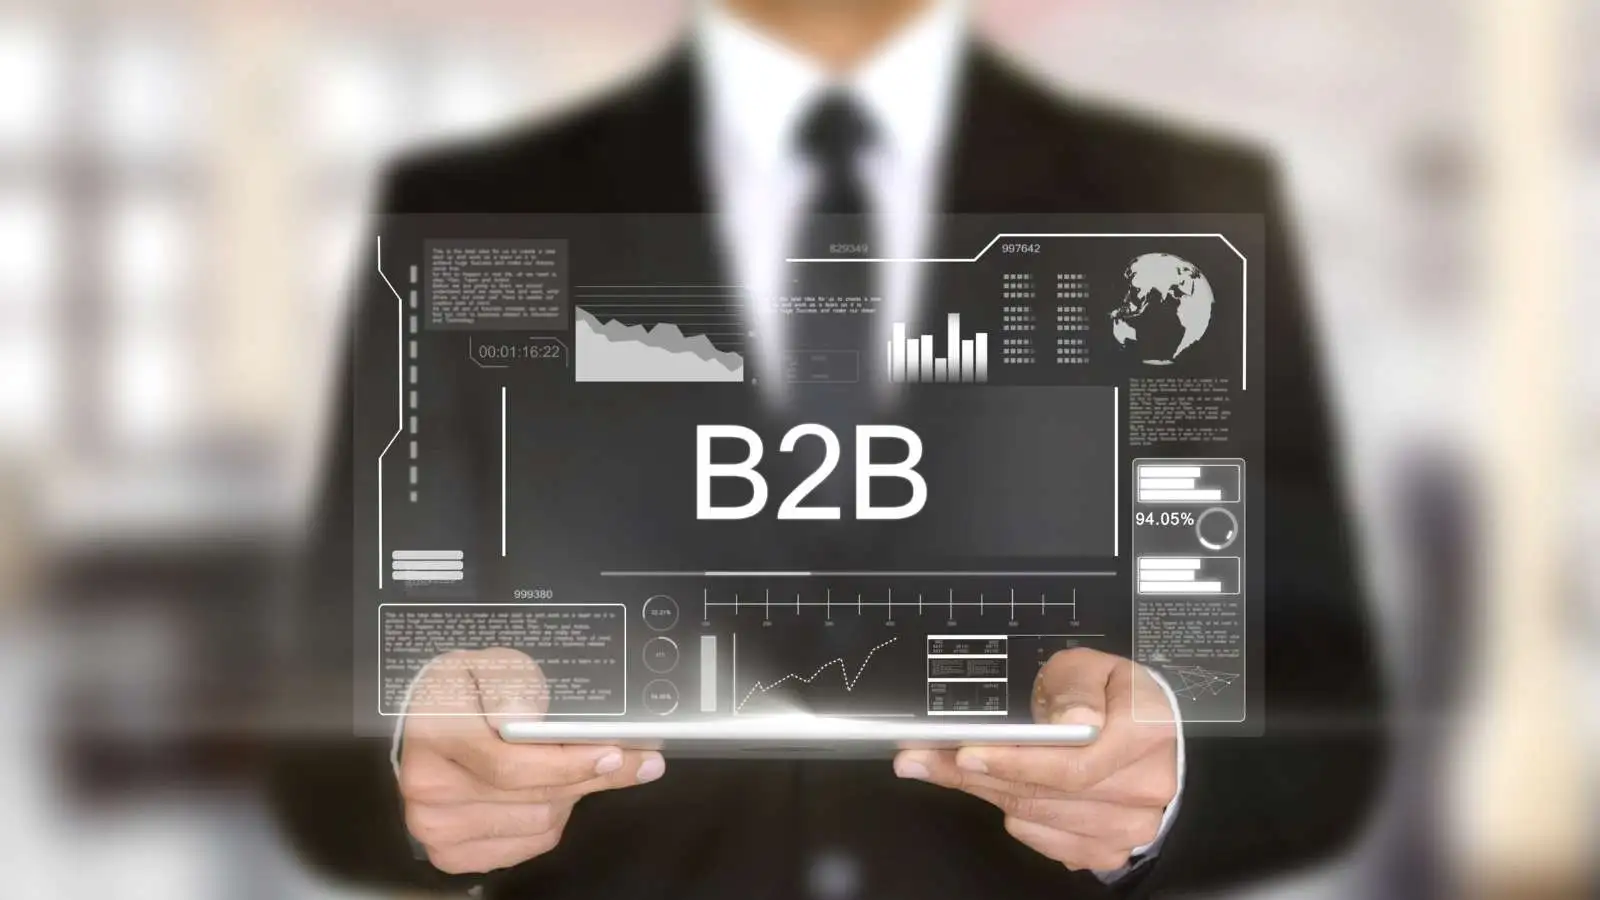 price-optimization-in-B2B-and-ERP-technologies